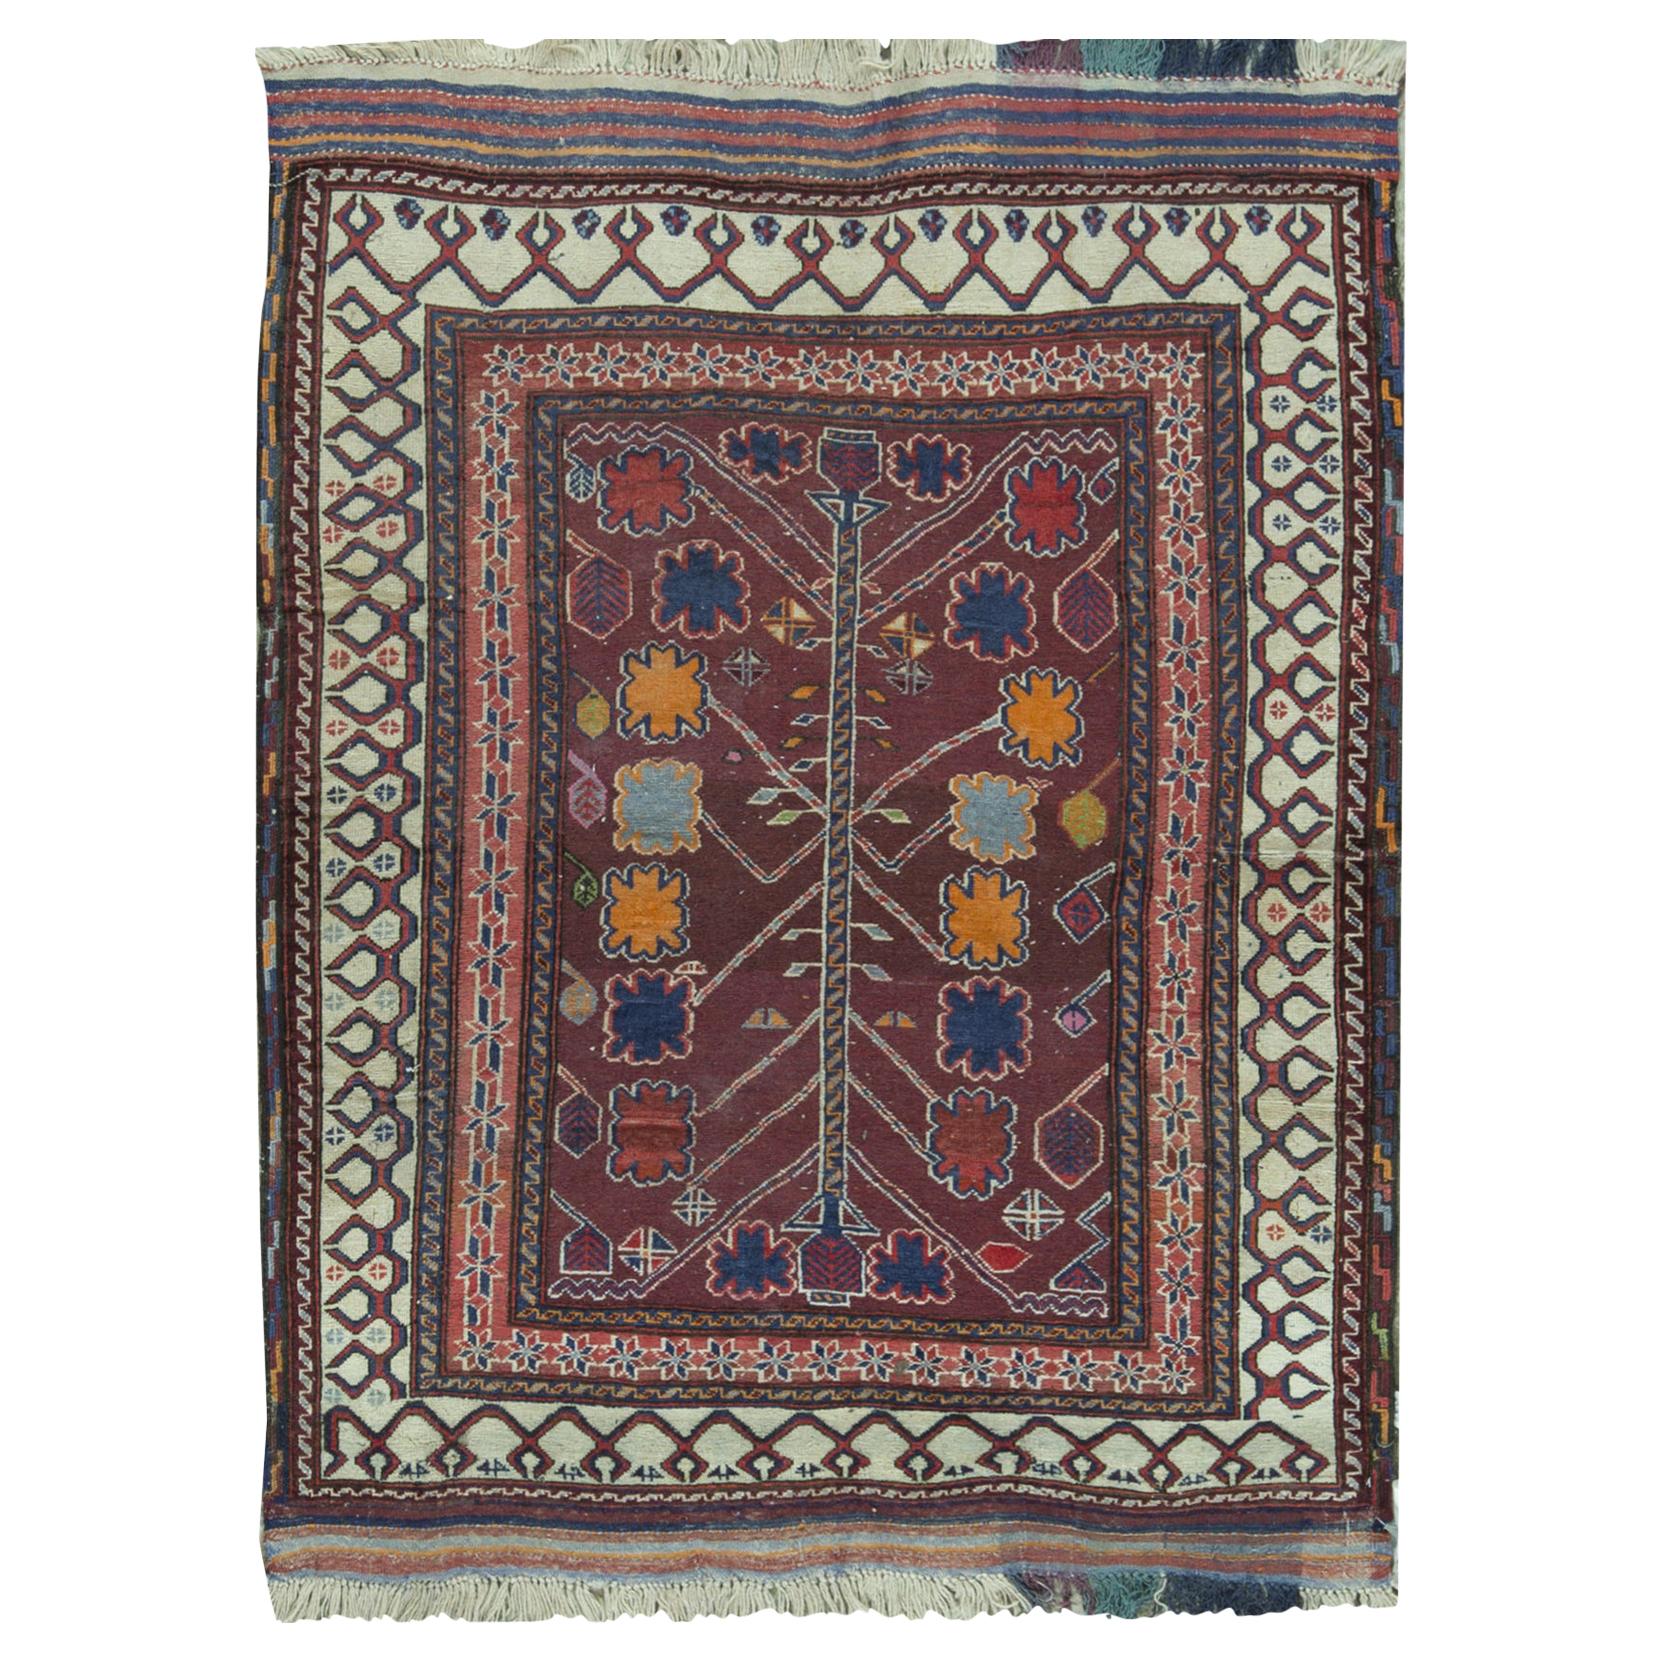 One-of-a-Kind Traditional Handwoven  Wool Area Rug 4’8" x 5’5”. For Sale